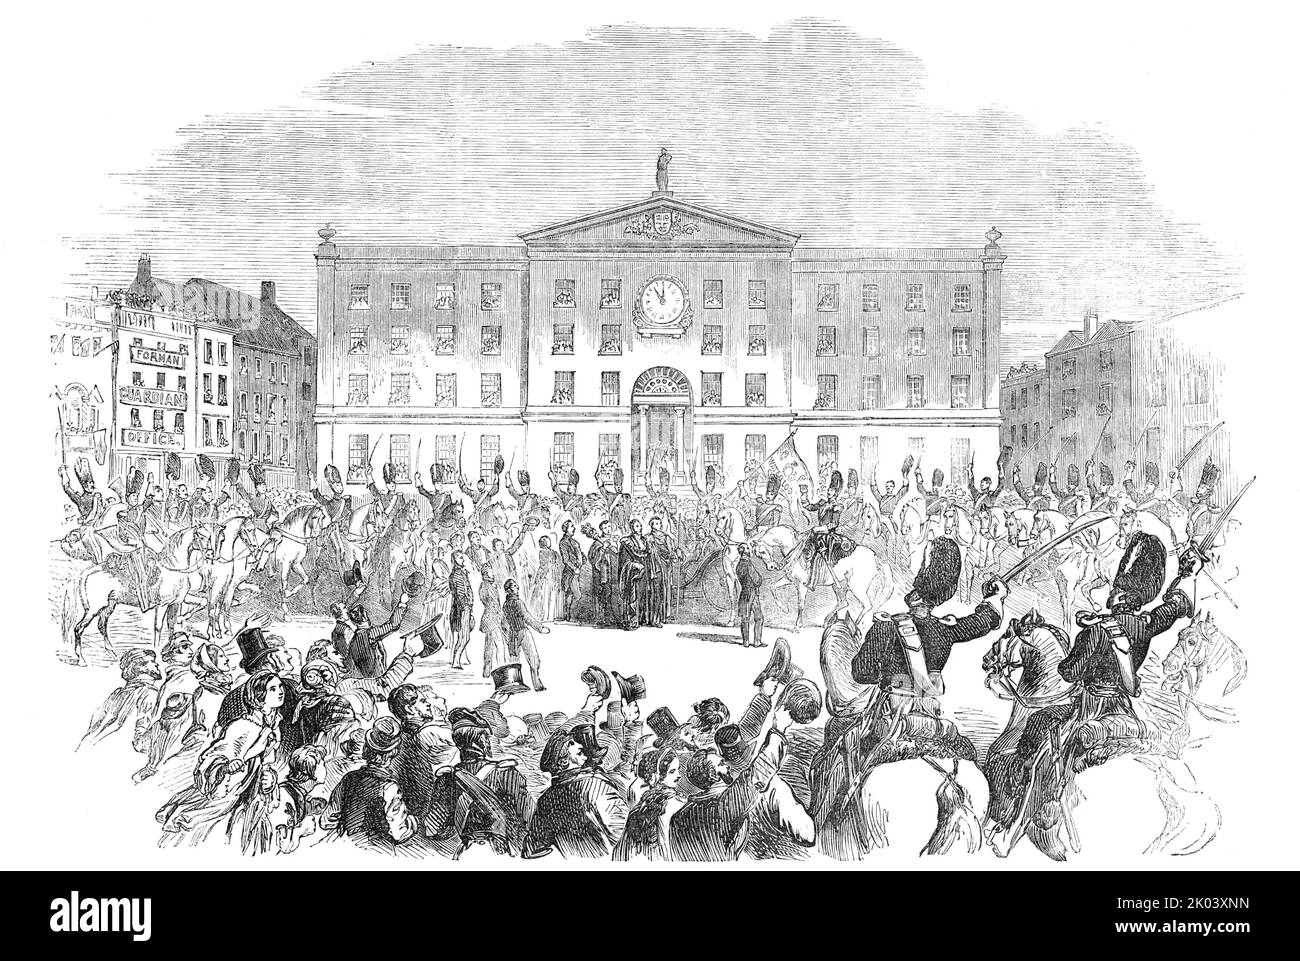 The Scots Greys leaving Nottingham for the War in the East, 1854. British troops leaving for the Crimean War: 'The Mayor...having arranged to bid the troops a public farewell...the Corporation assembled at the Exchange...The streets were lined with spectators, eager to pay the tribute of respect and good wishes to the brave fellows...The ancient &quot;loving- cup&quot; of the Corporation was then produced, and having been filled with wine, the Mayor (J. Reckless, Esq) addressed the Colonel and his officers, intimating the public sense of the good conduct of the regiment, and proposing the heal Stock Photo